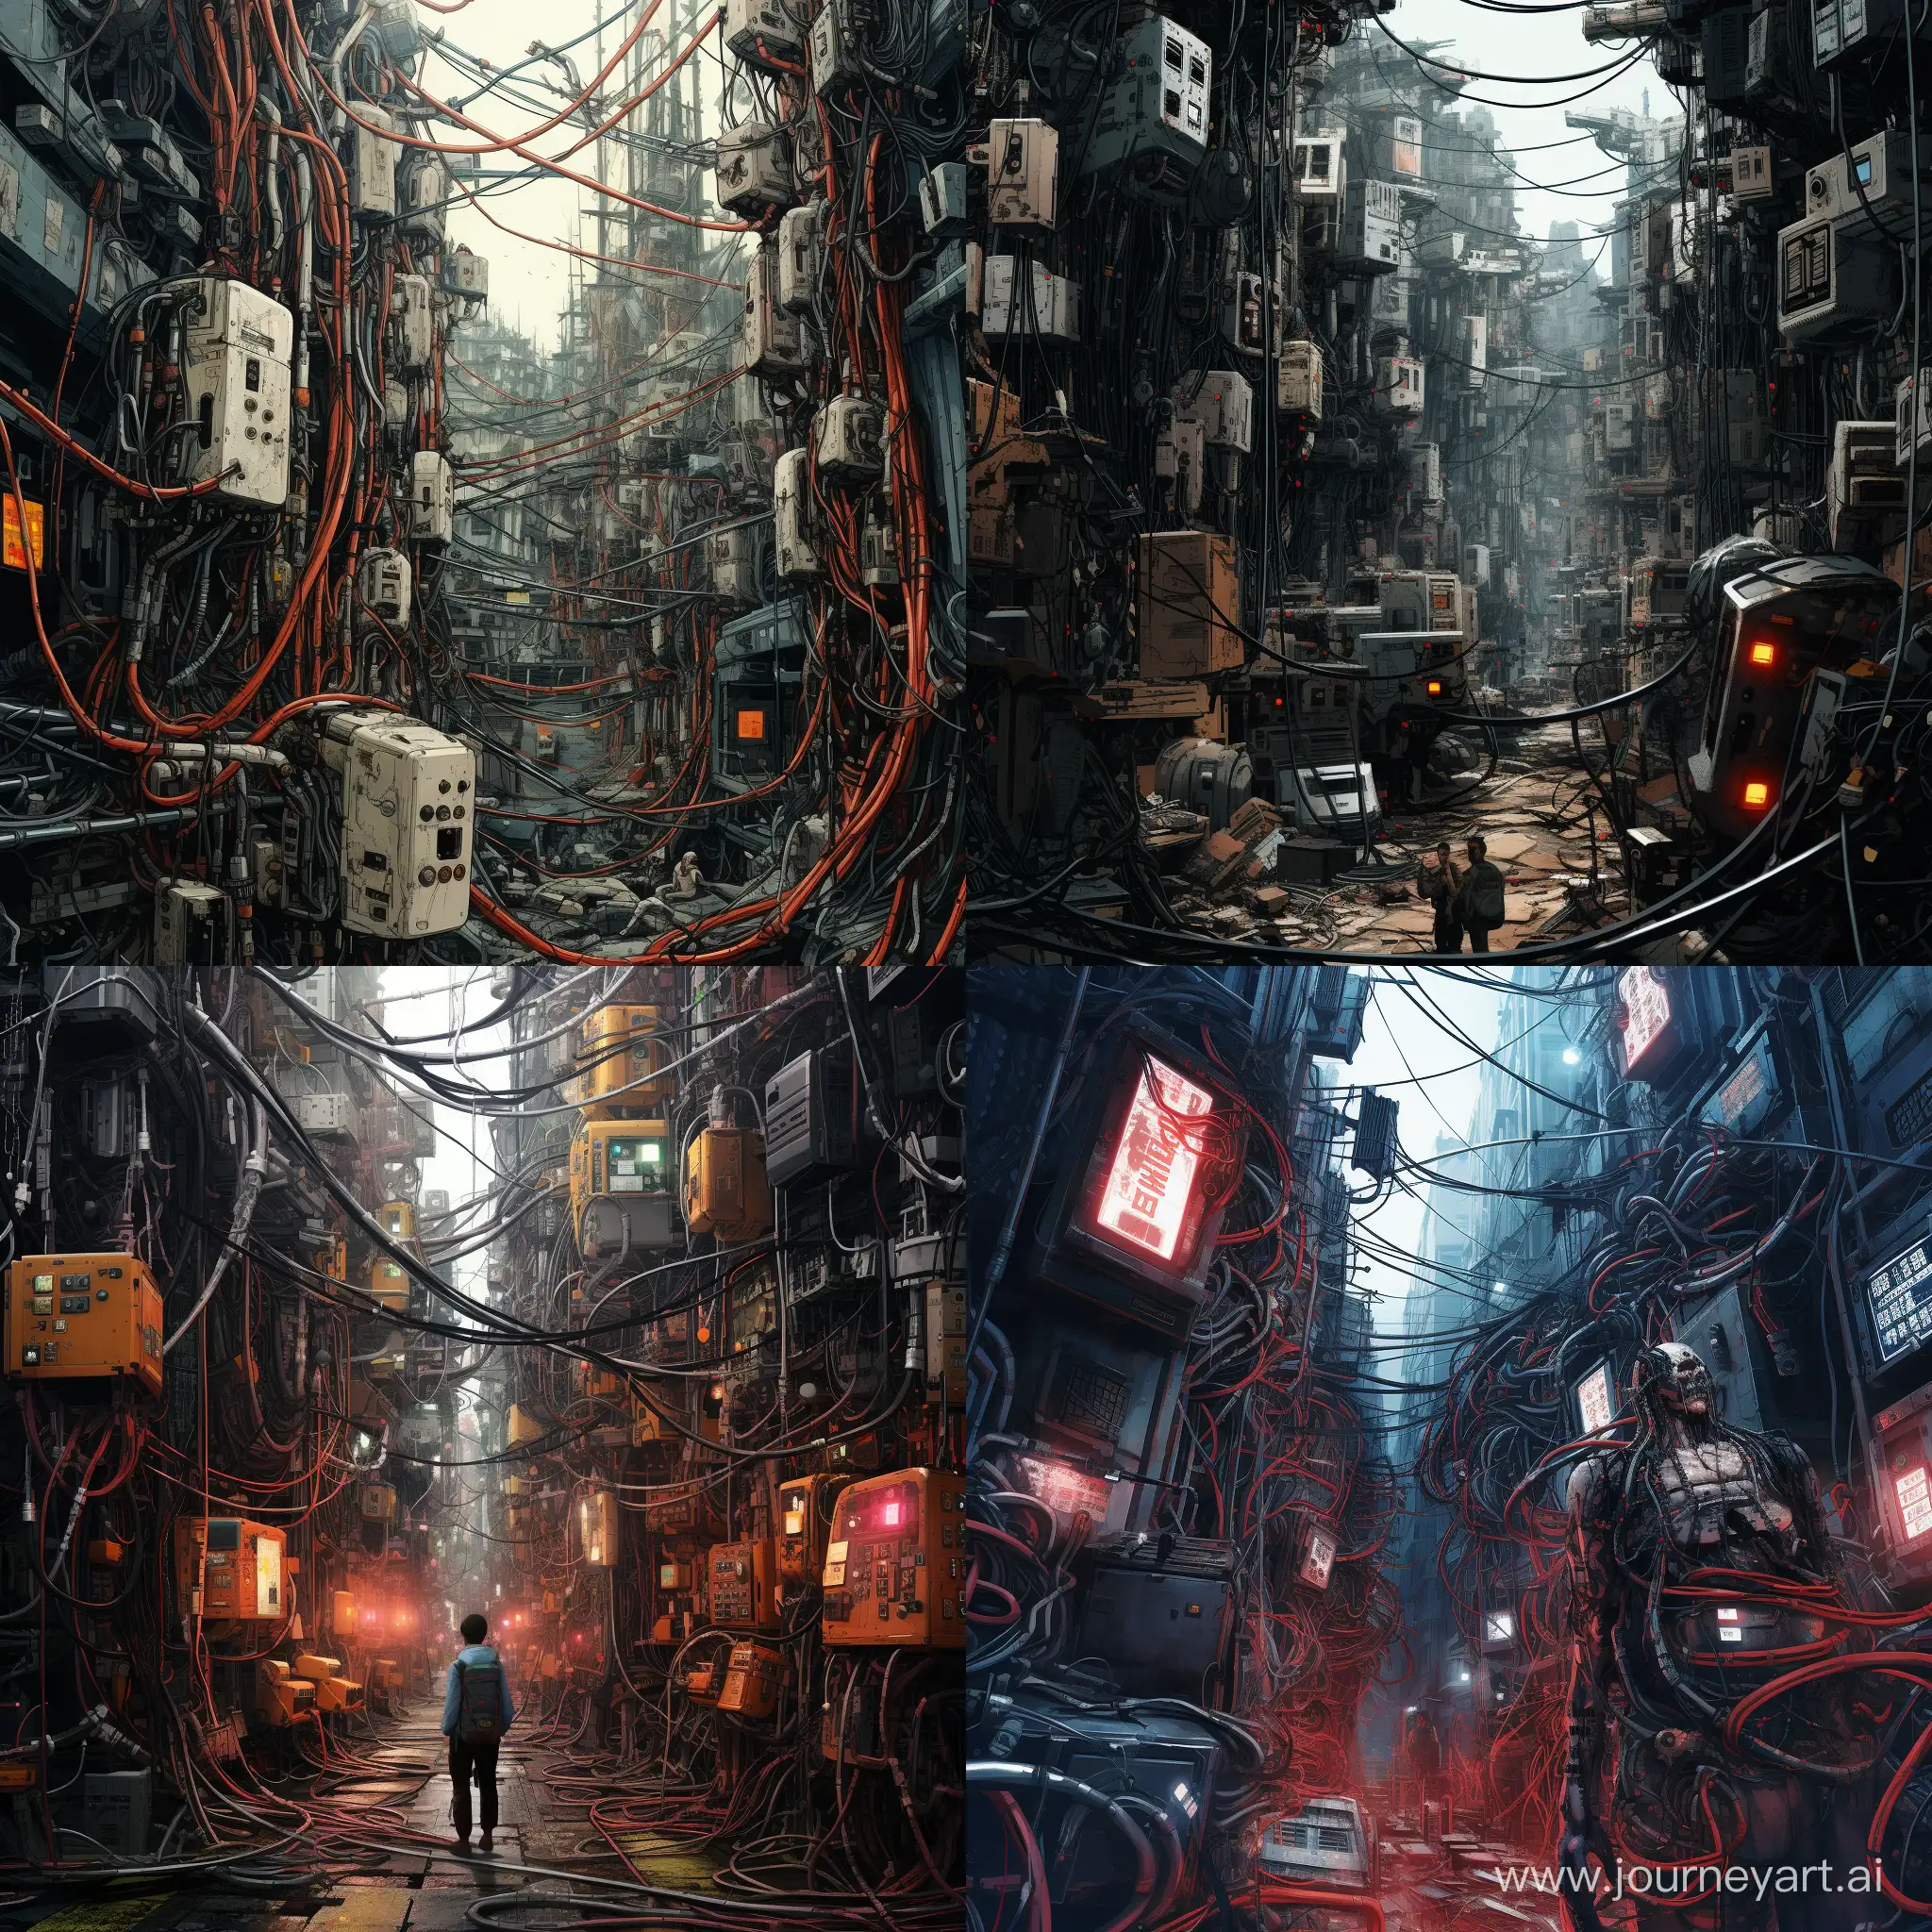 Futuristic-Cyberpunk-Scene-with-Tangled-Wires-and-Mechanisms